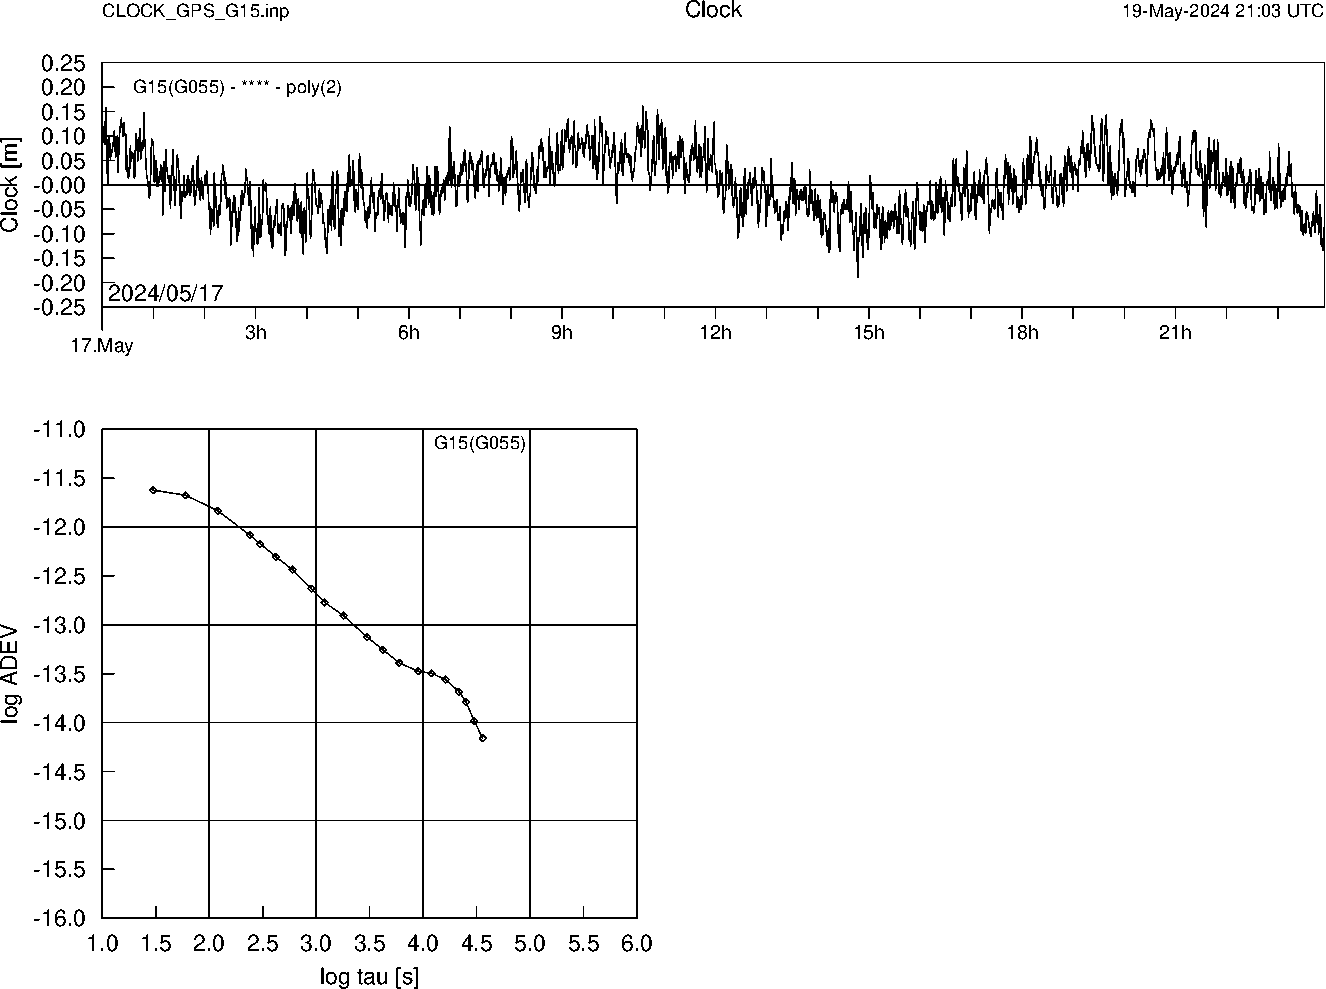 GPS G15 Clock Time Series and Allan Deviation